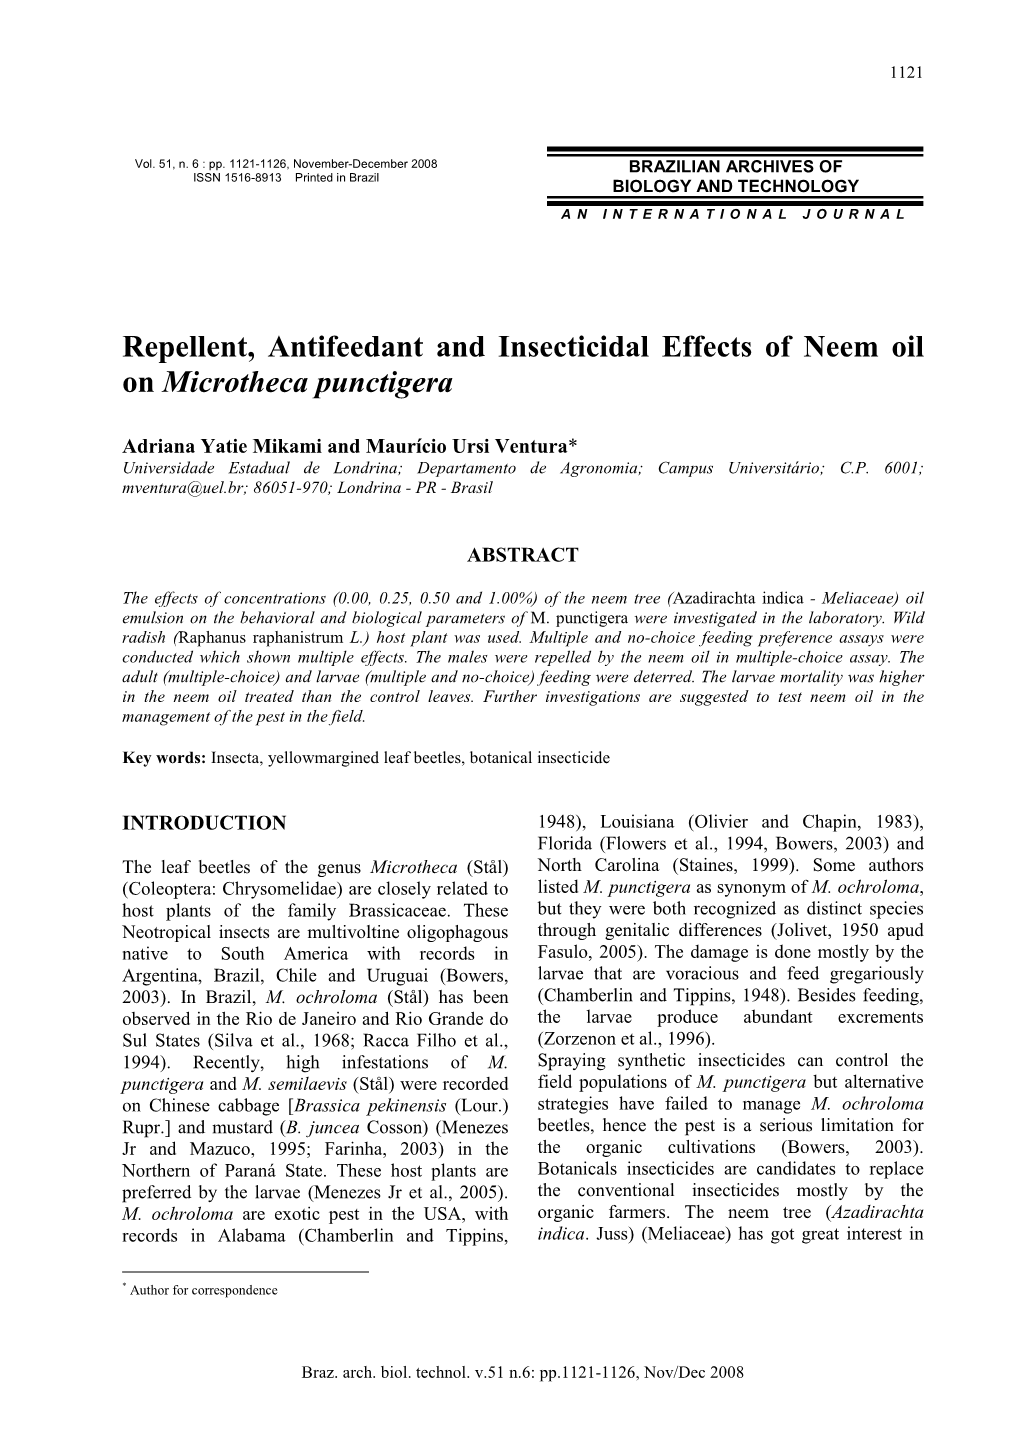 Repellent, Antifeedant and Insecticidal Effects of Neem Oil on Microtheca Punctigera